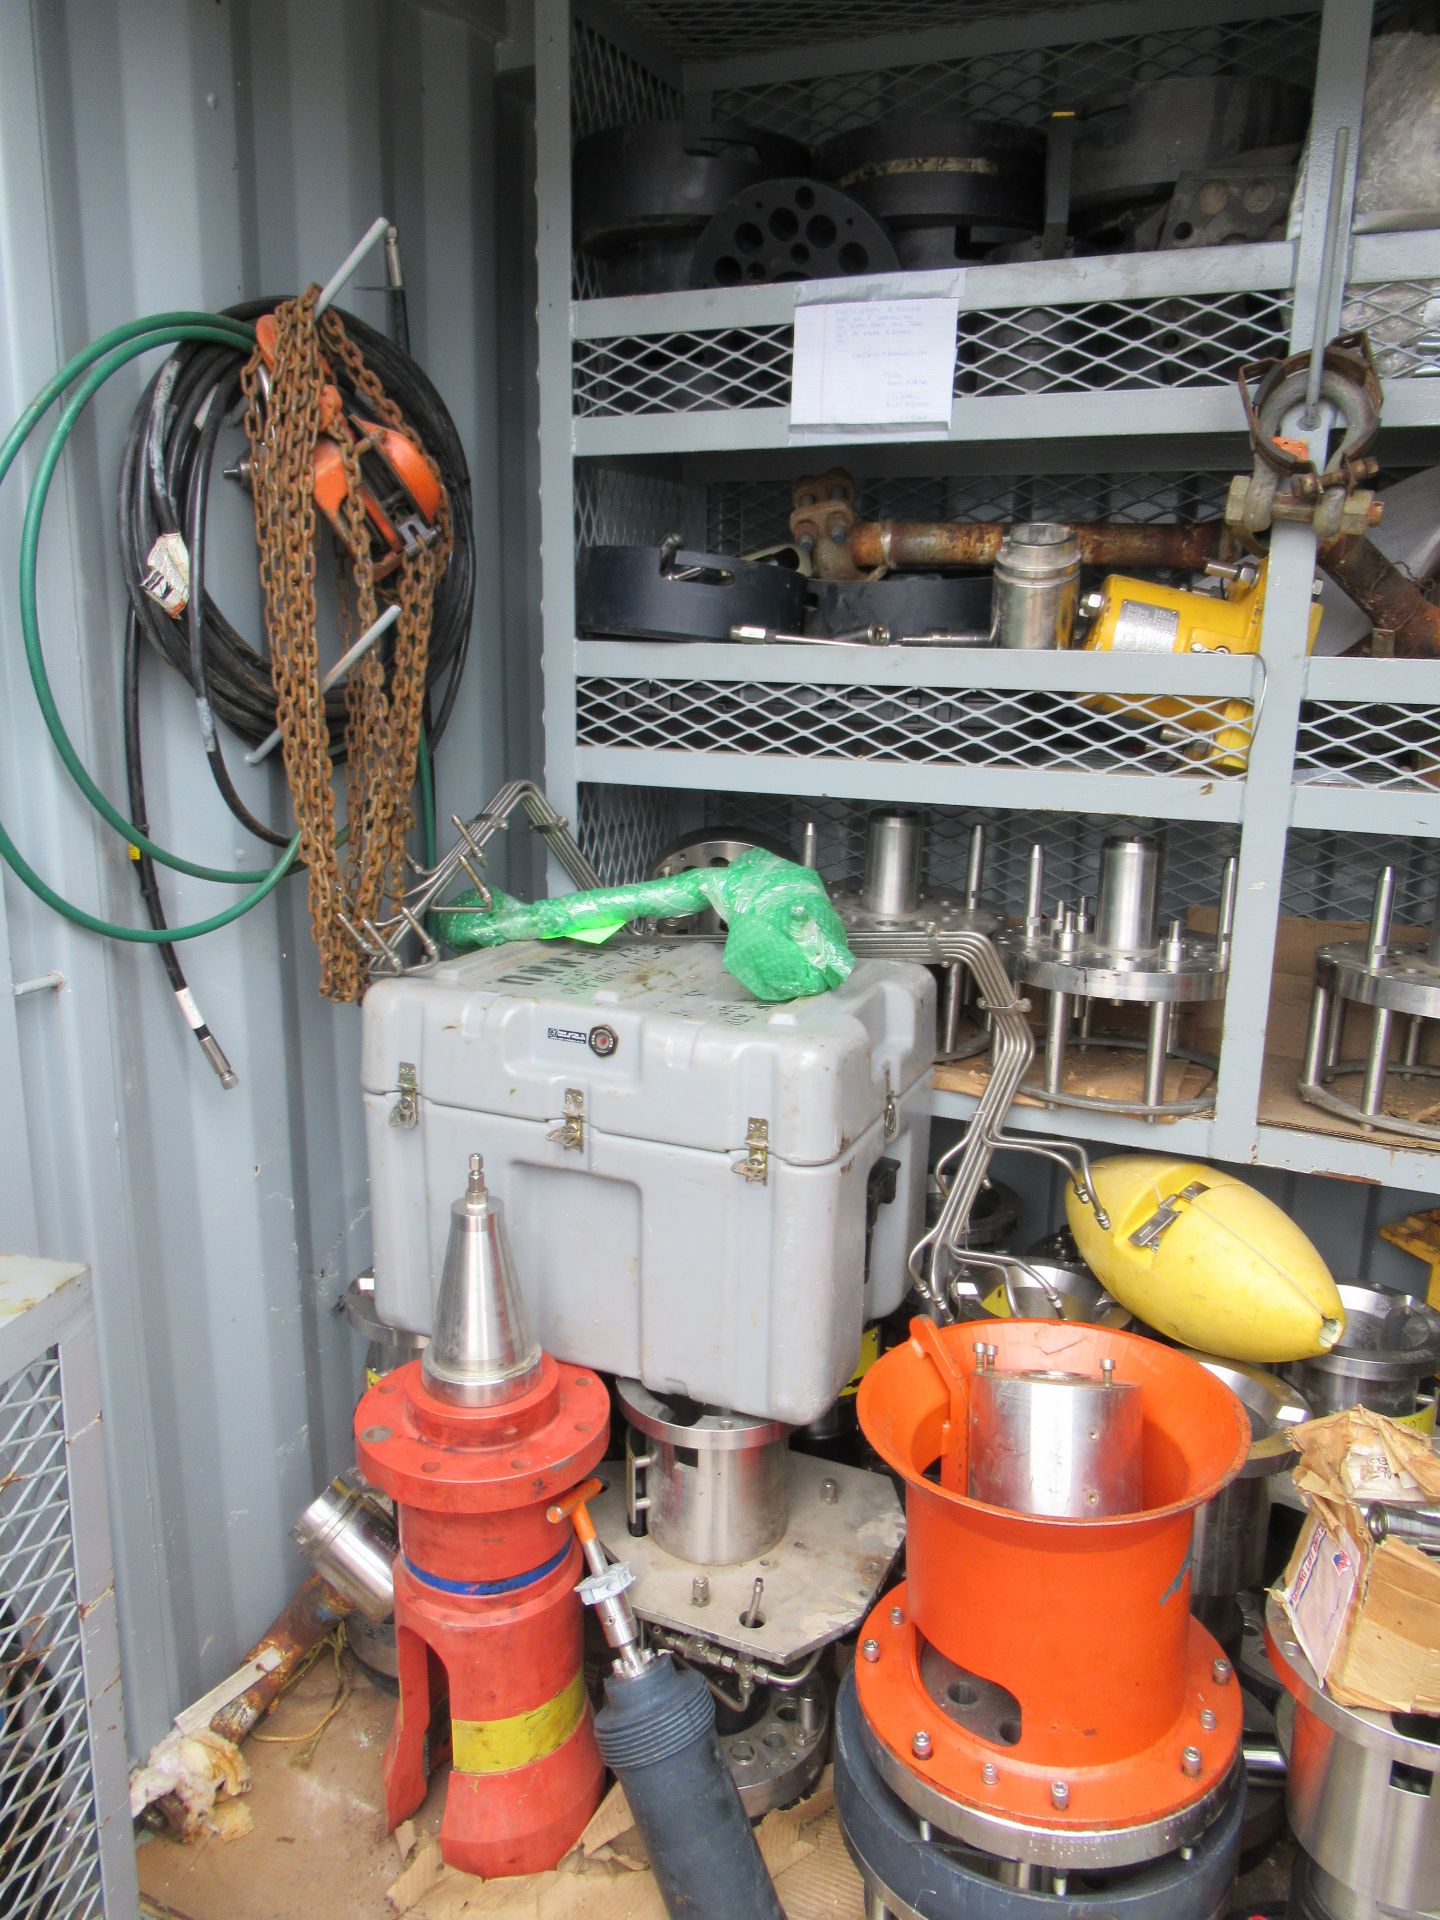 LOT CONSISTING OF 8’ X 4’ SEA CONTAINER AND CONTENTS, including subsea connectors and umbilical - Image 5 of 14